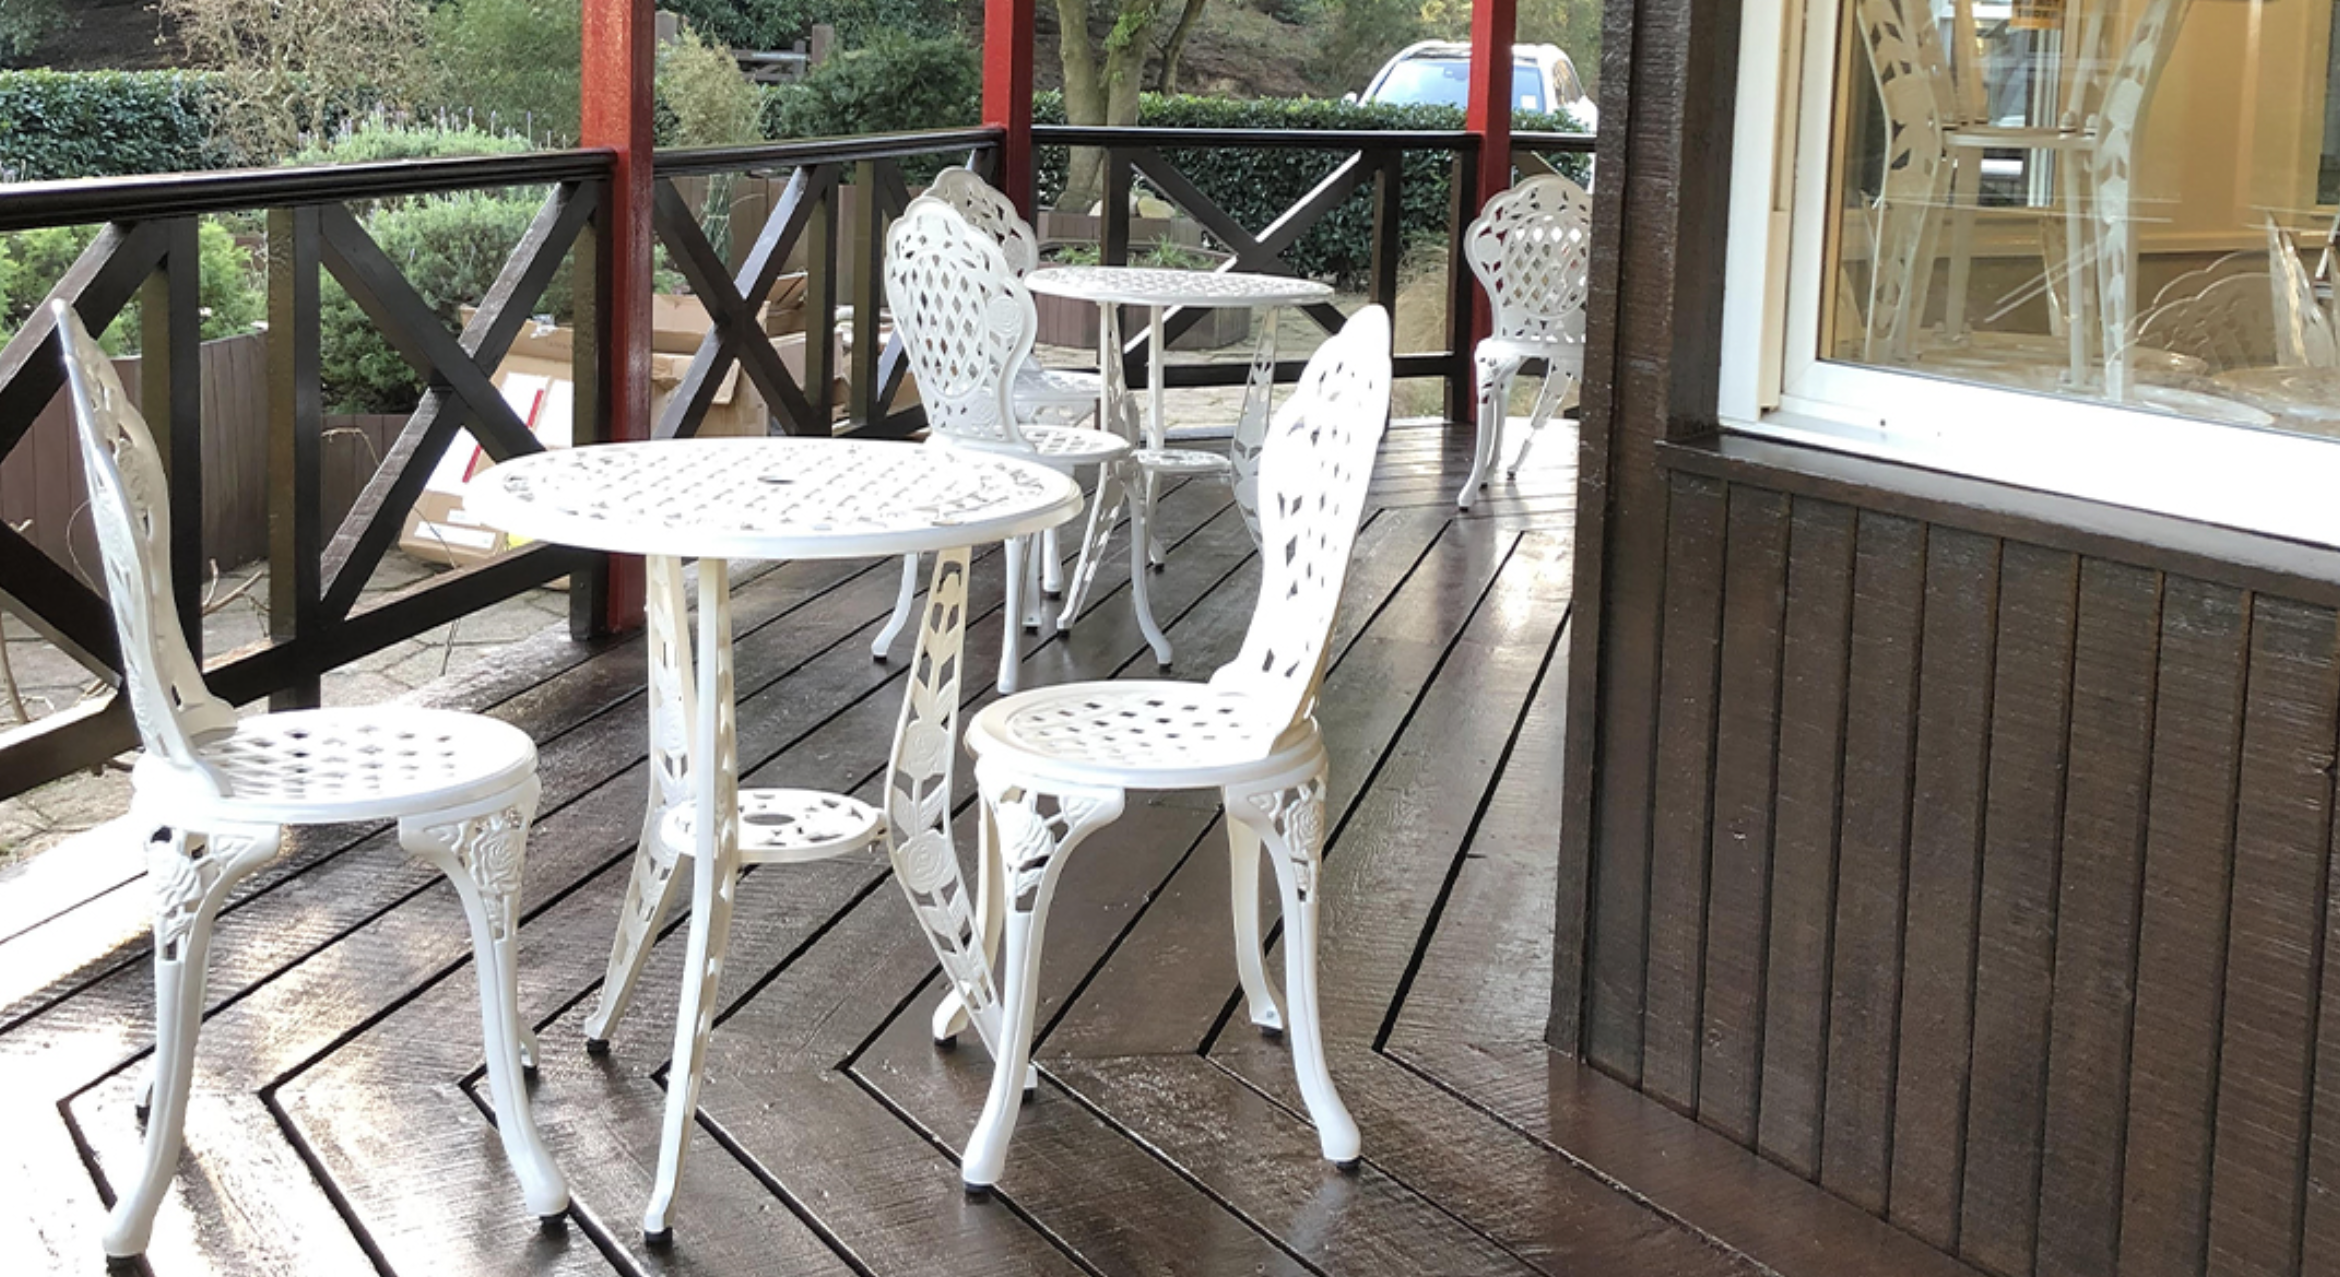 The Jersey Farm Shop also have our Trade Garden Furniture outside their cafe and gift shop